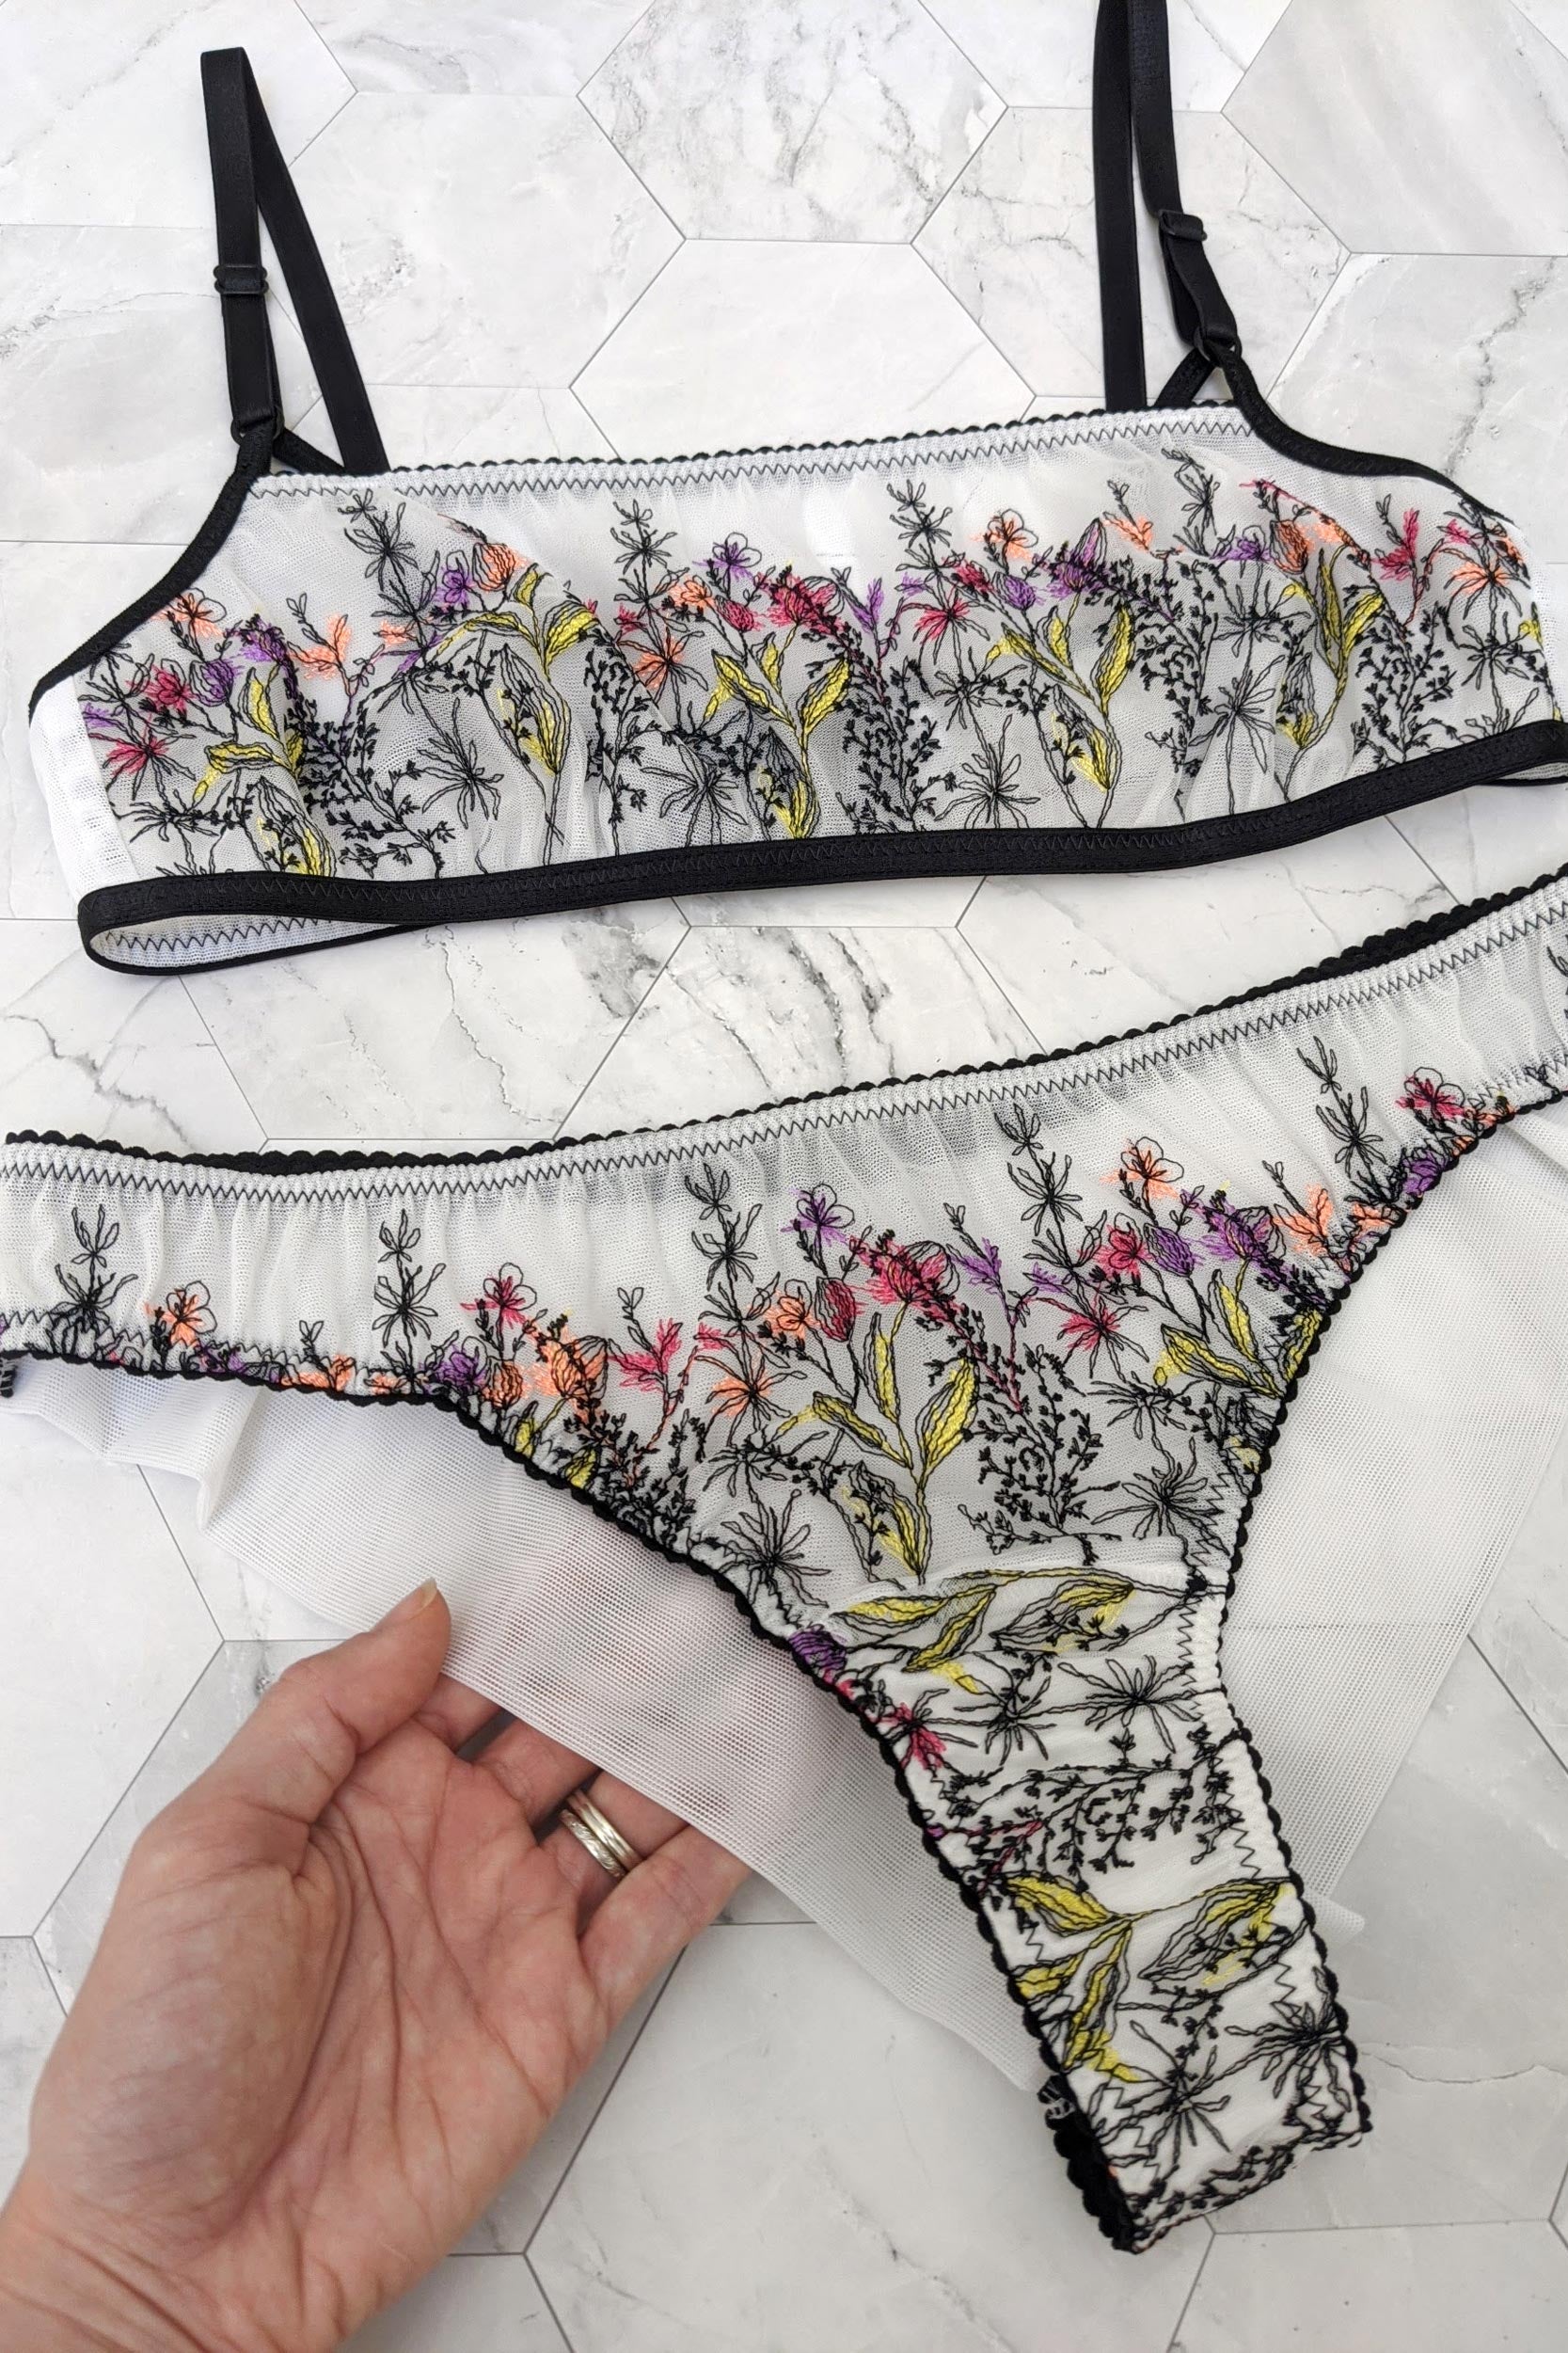 Ophelia knickers  Handcrafted, floral embroidery underwear